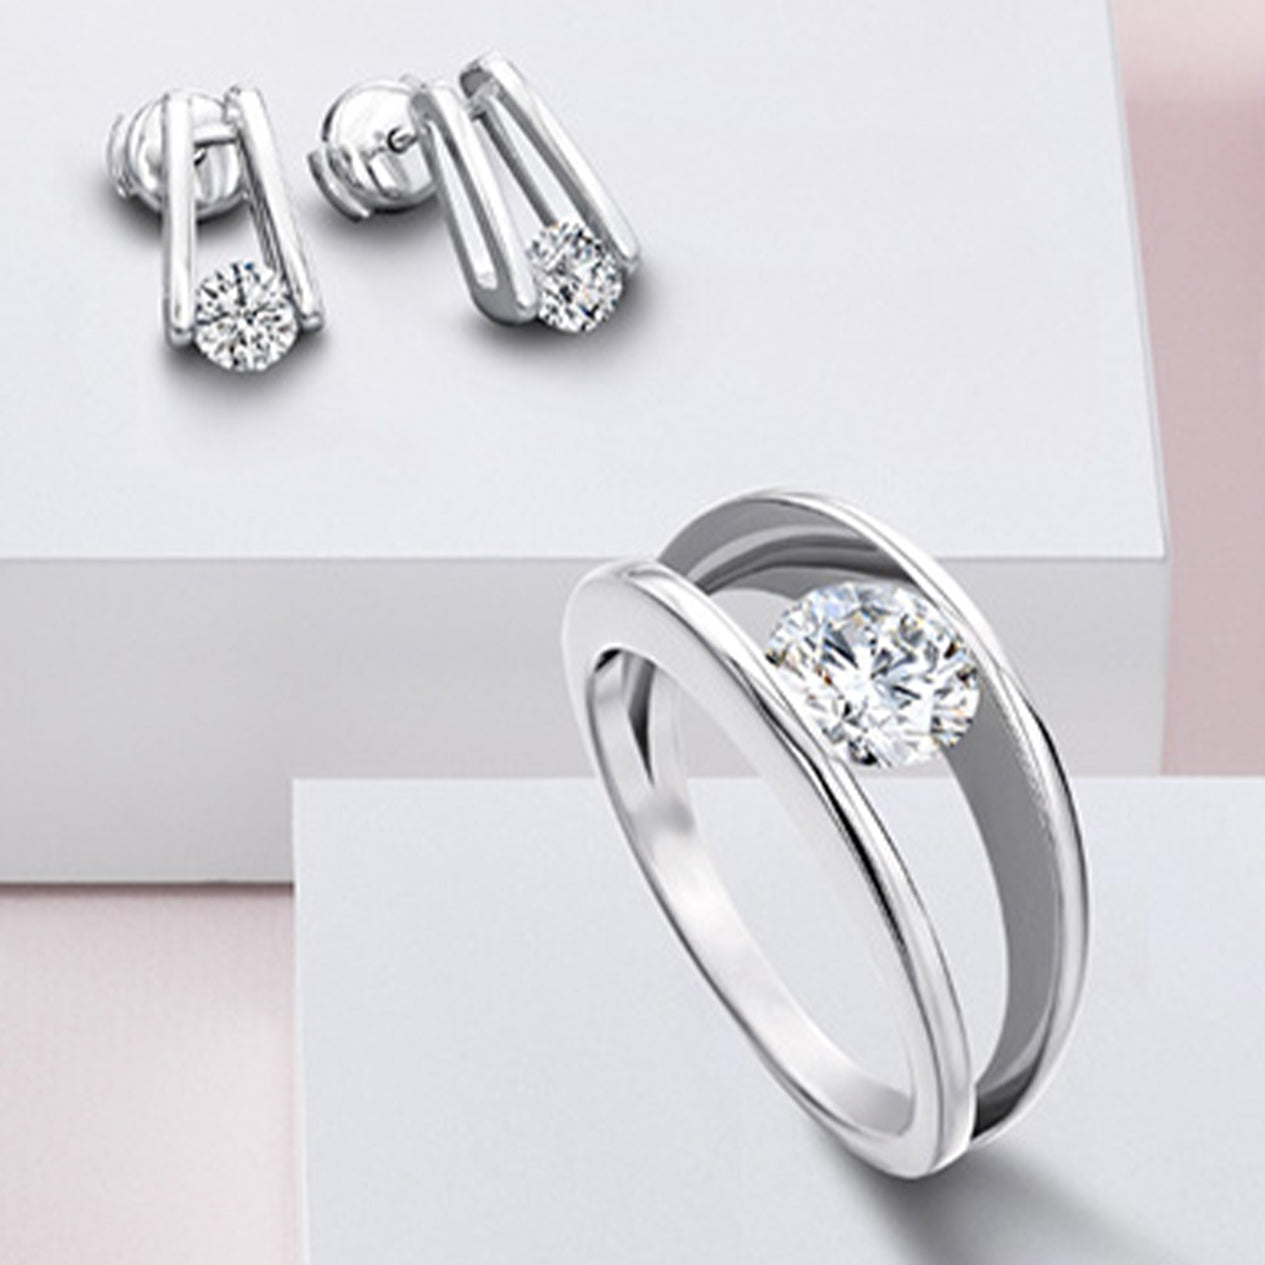 Shimansky's signature Millennium collection diamond ring and earrings